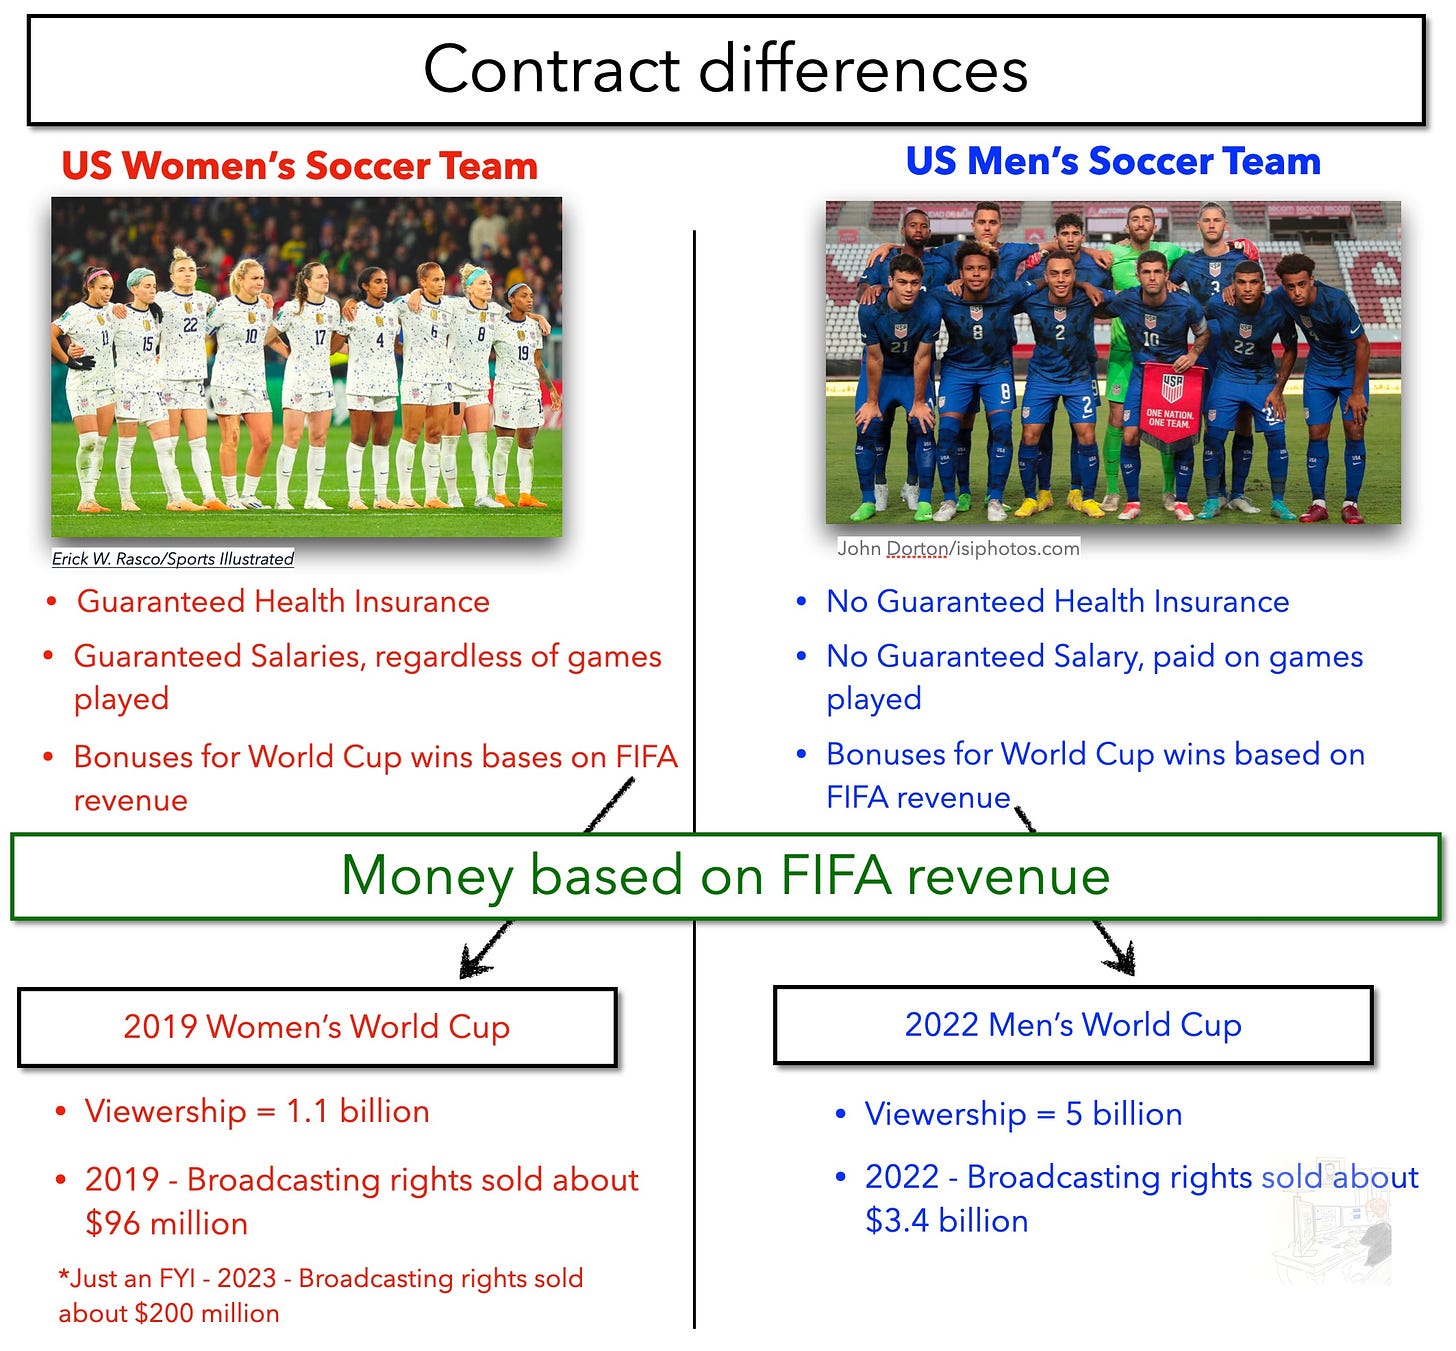 Sources used for the information in this image come from articles in ESPN, Sports Business Journal, FIFA, and Wall Street Journal